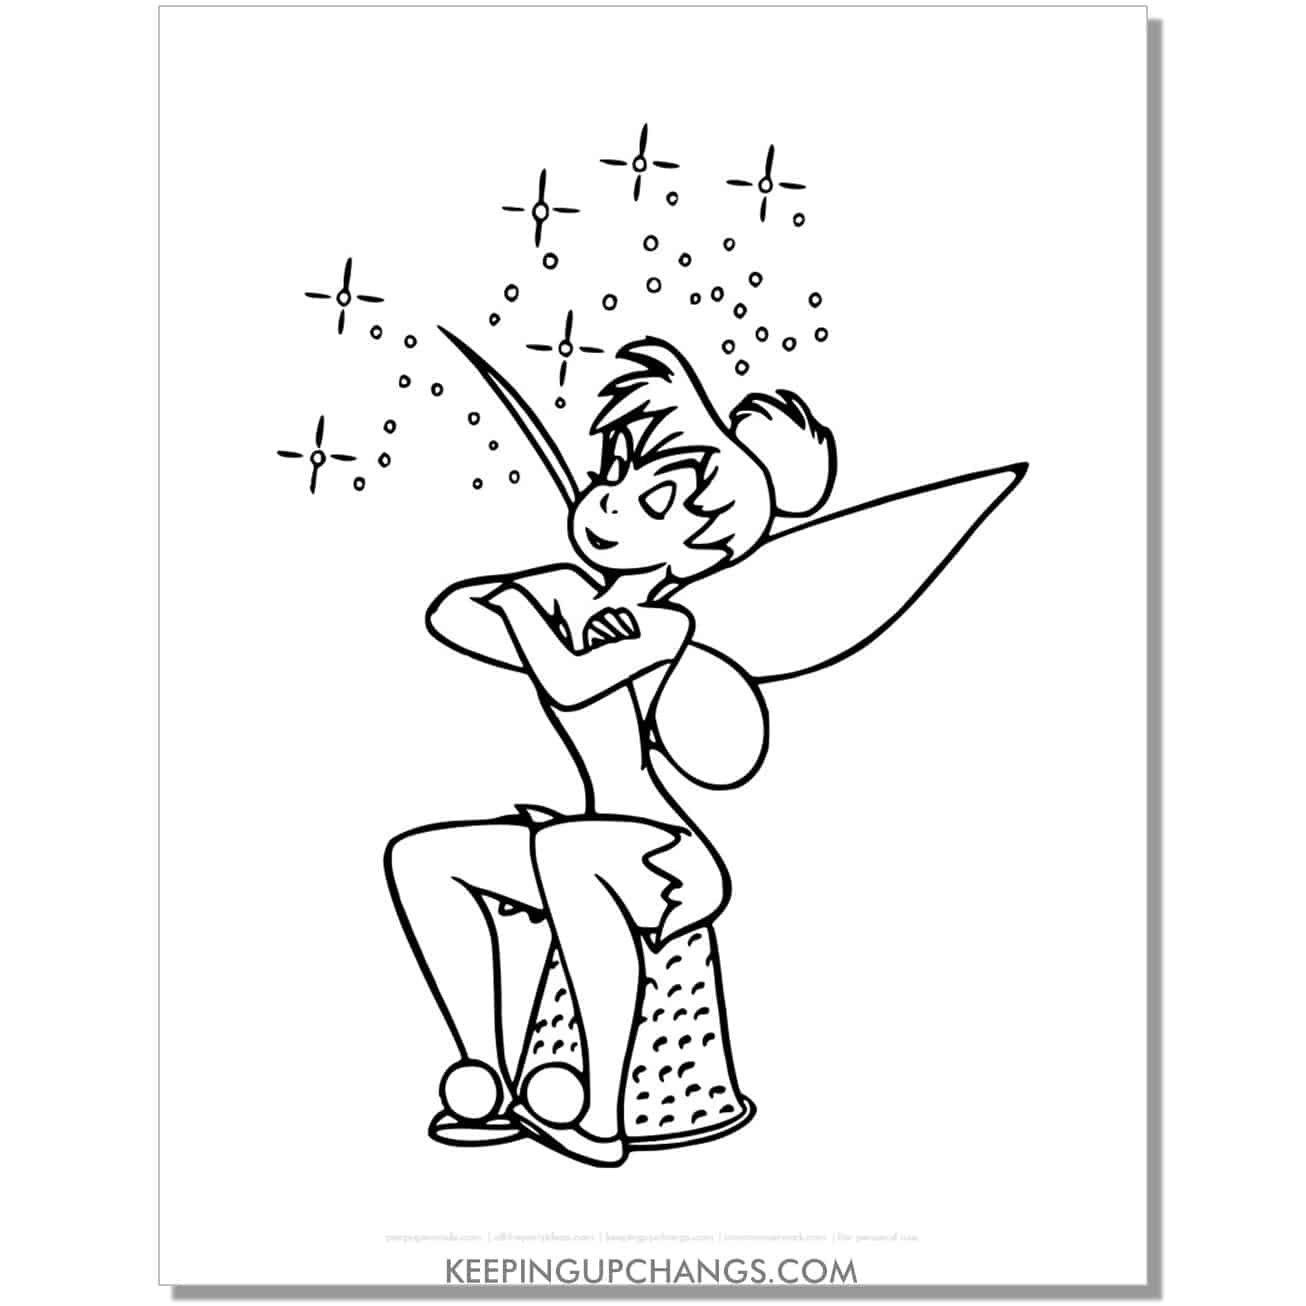 tinkerbell sitting on thimble coloring page, sheet.